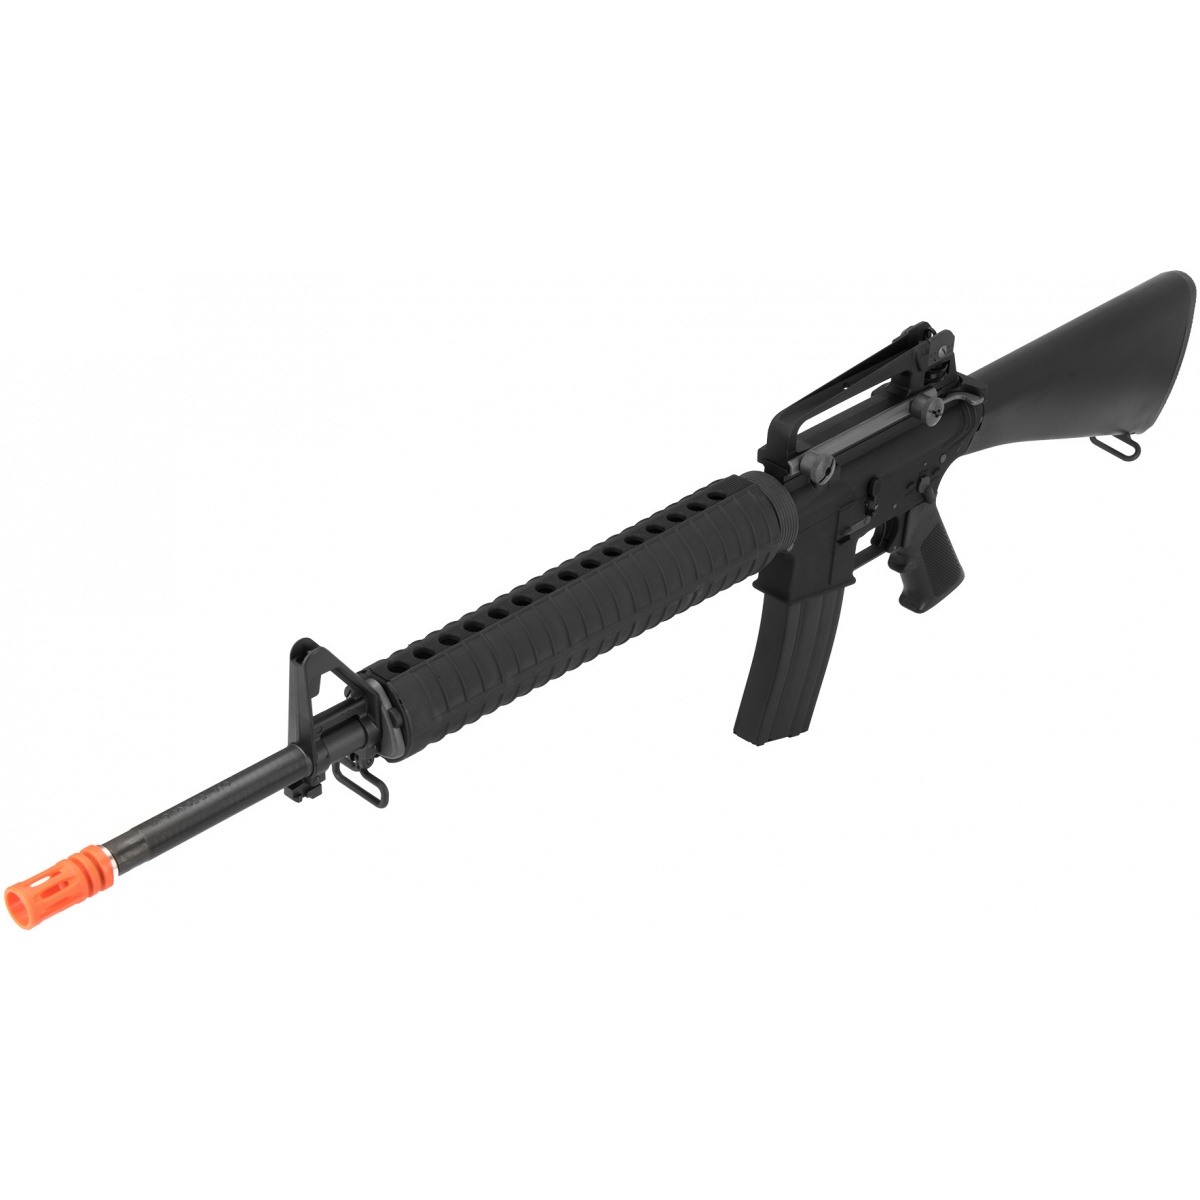 Upgraded WE M16A1 Gas Blowback Airsoft Rifle LV1 2024ver